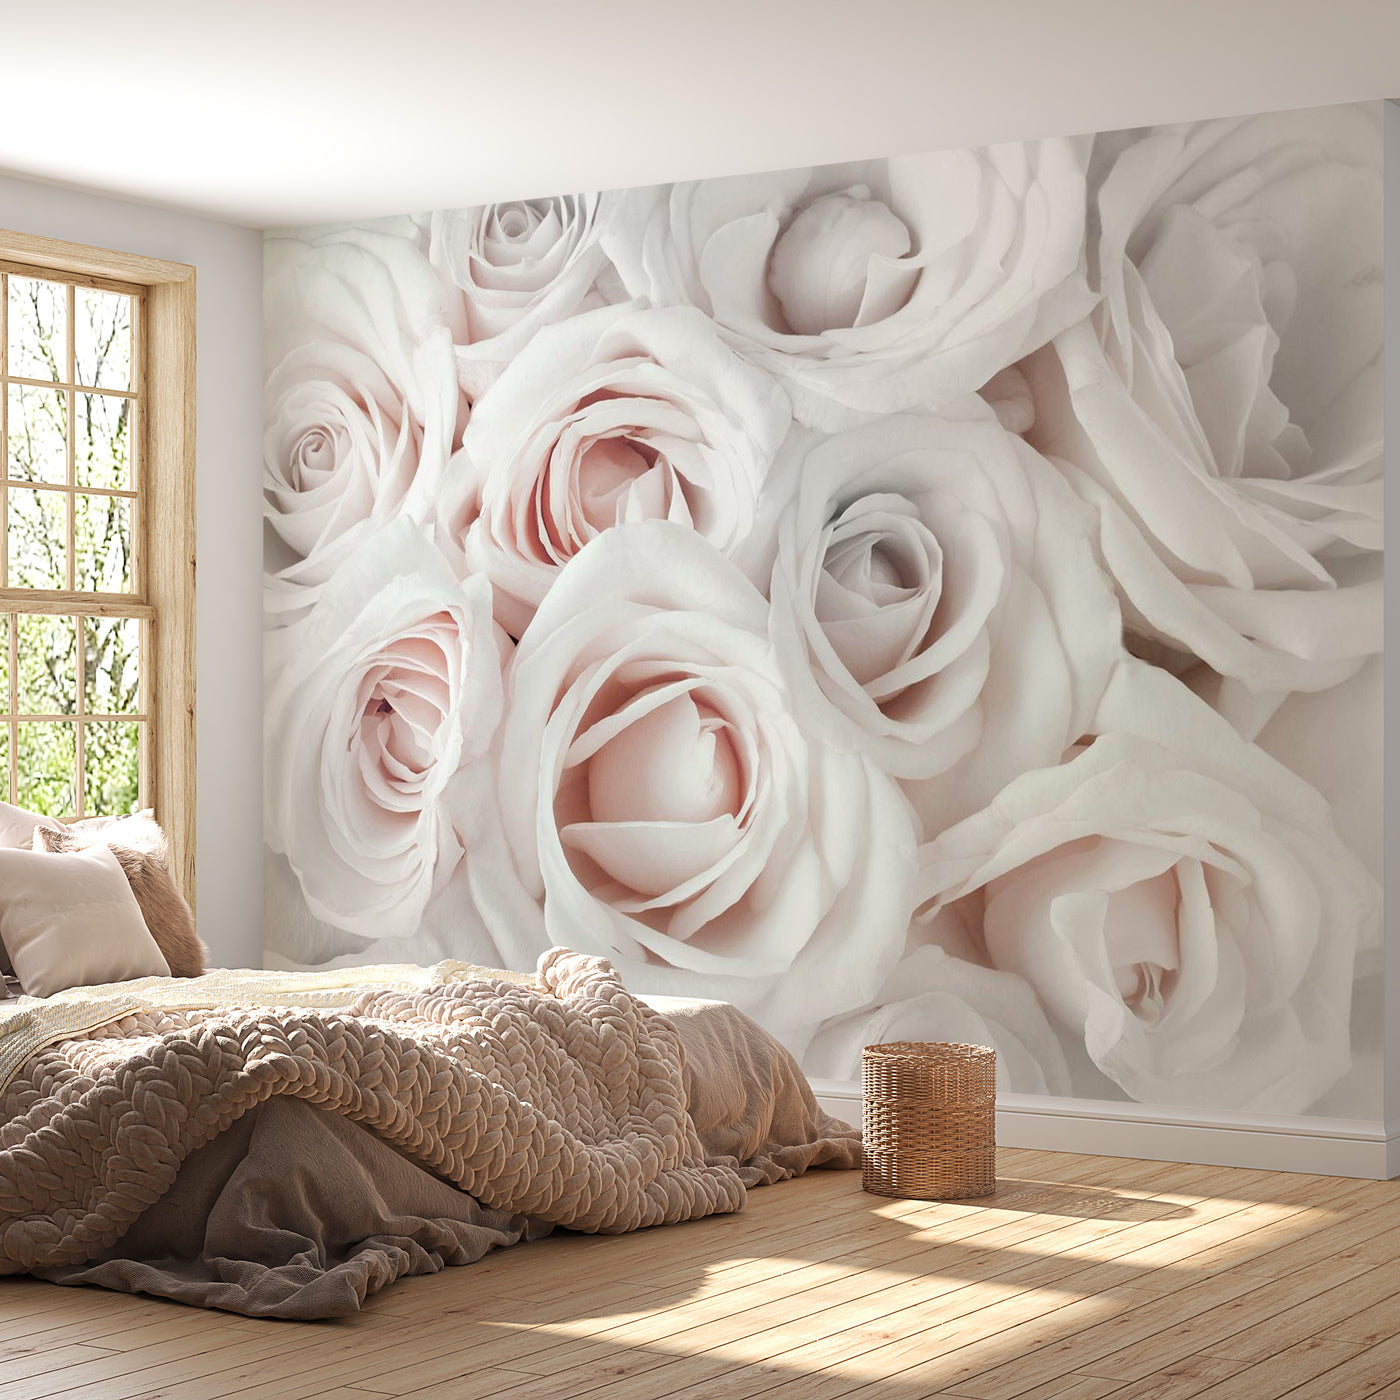 Peel & Stick Floral Wall Mural - Satin Rose Pink - Removable Wall Decals